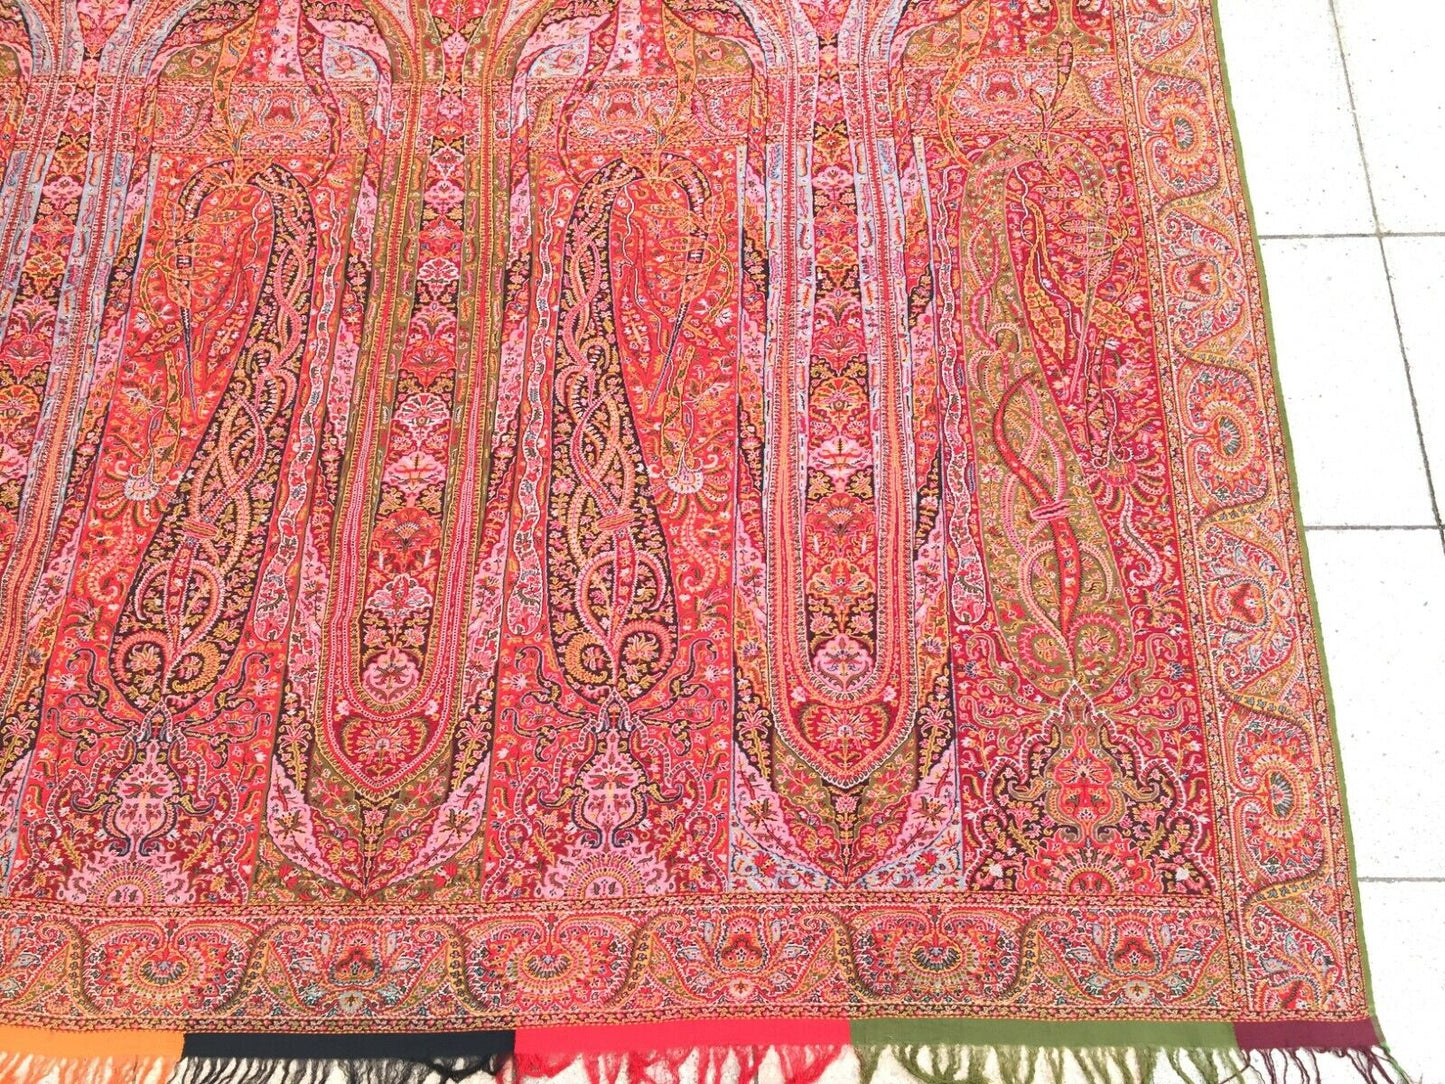 Intricate Designs Woven into Rich Red Fabric of Antique Kashmir Shawl - 1870s